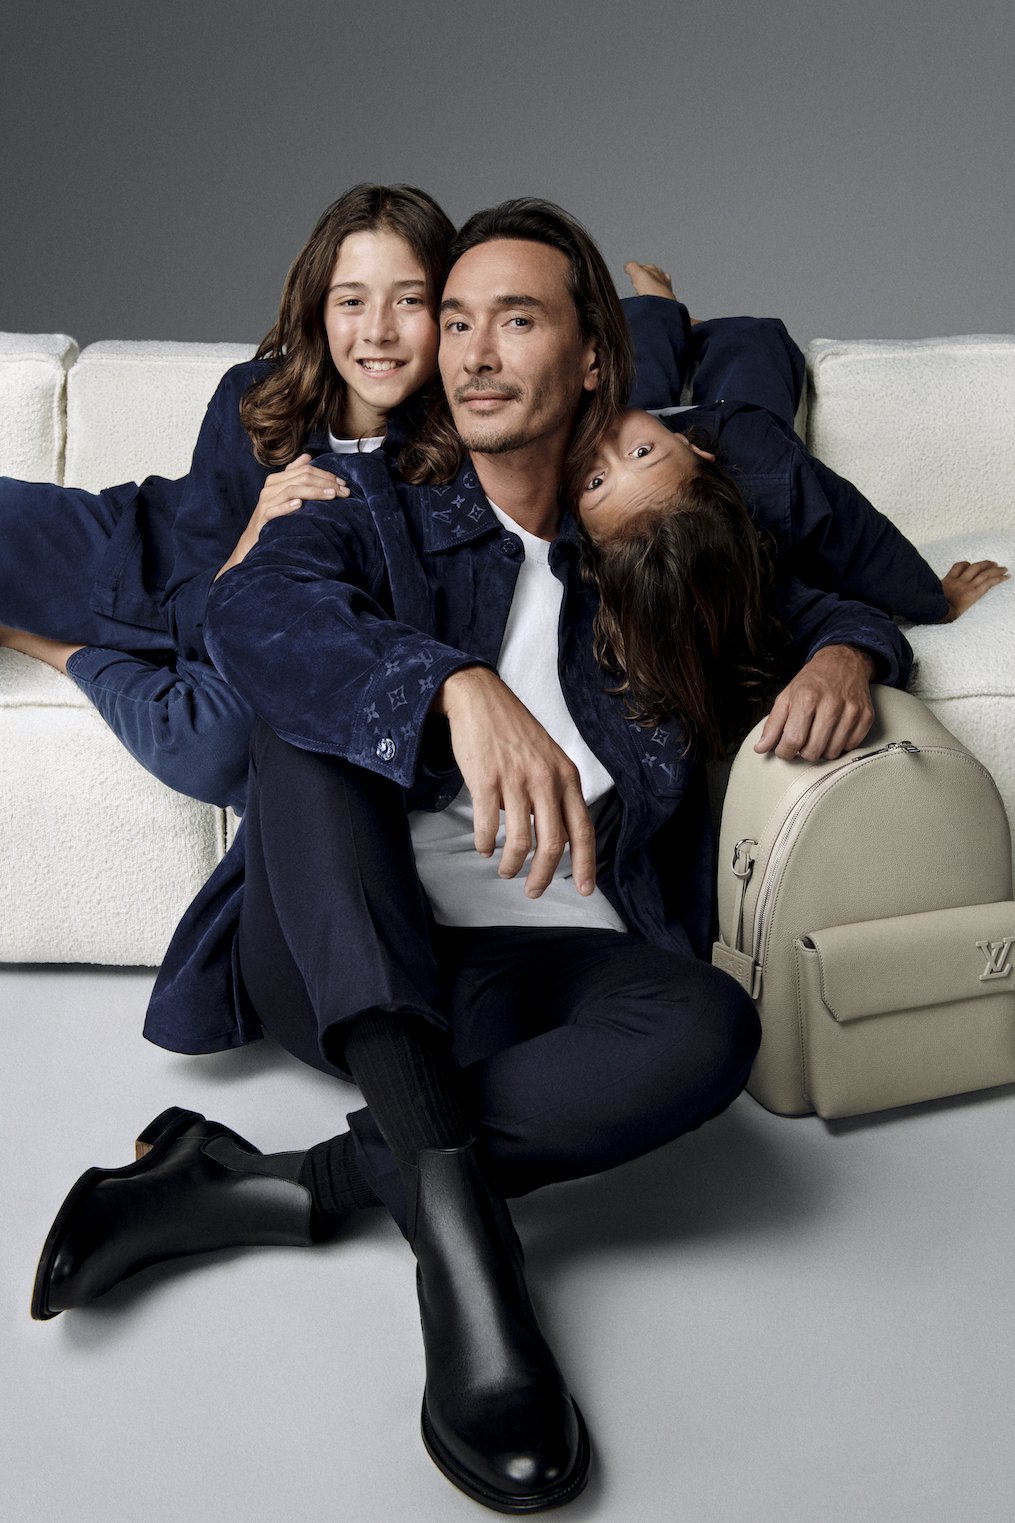 Louis Vuitton for the love of Dads — Dossier Magazine